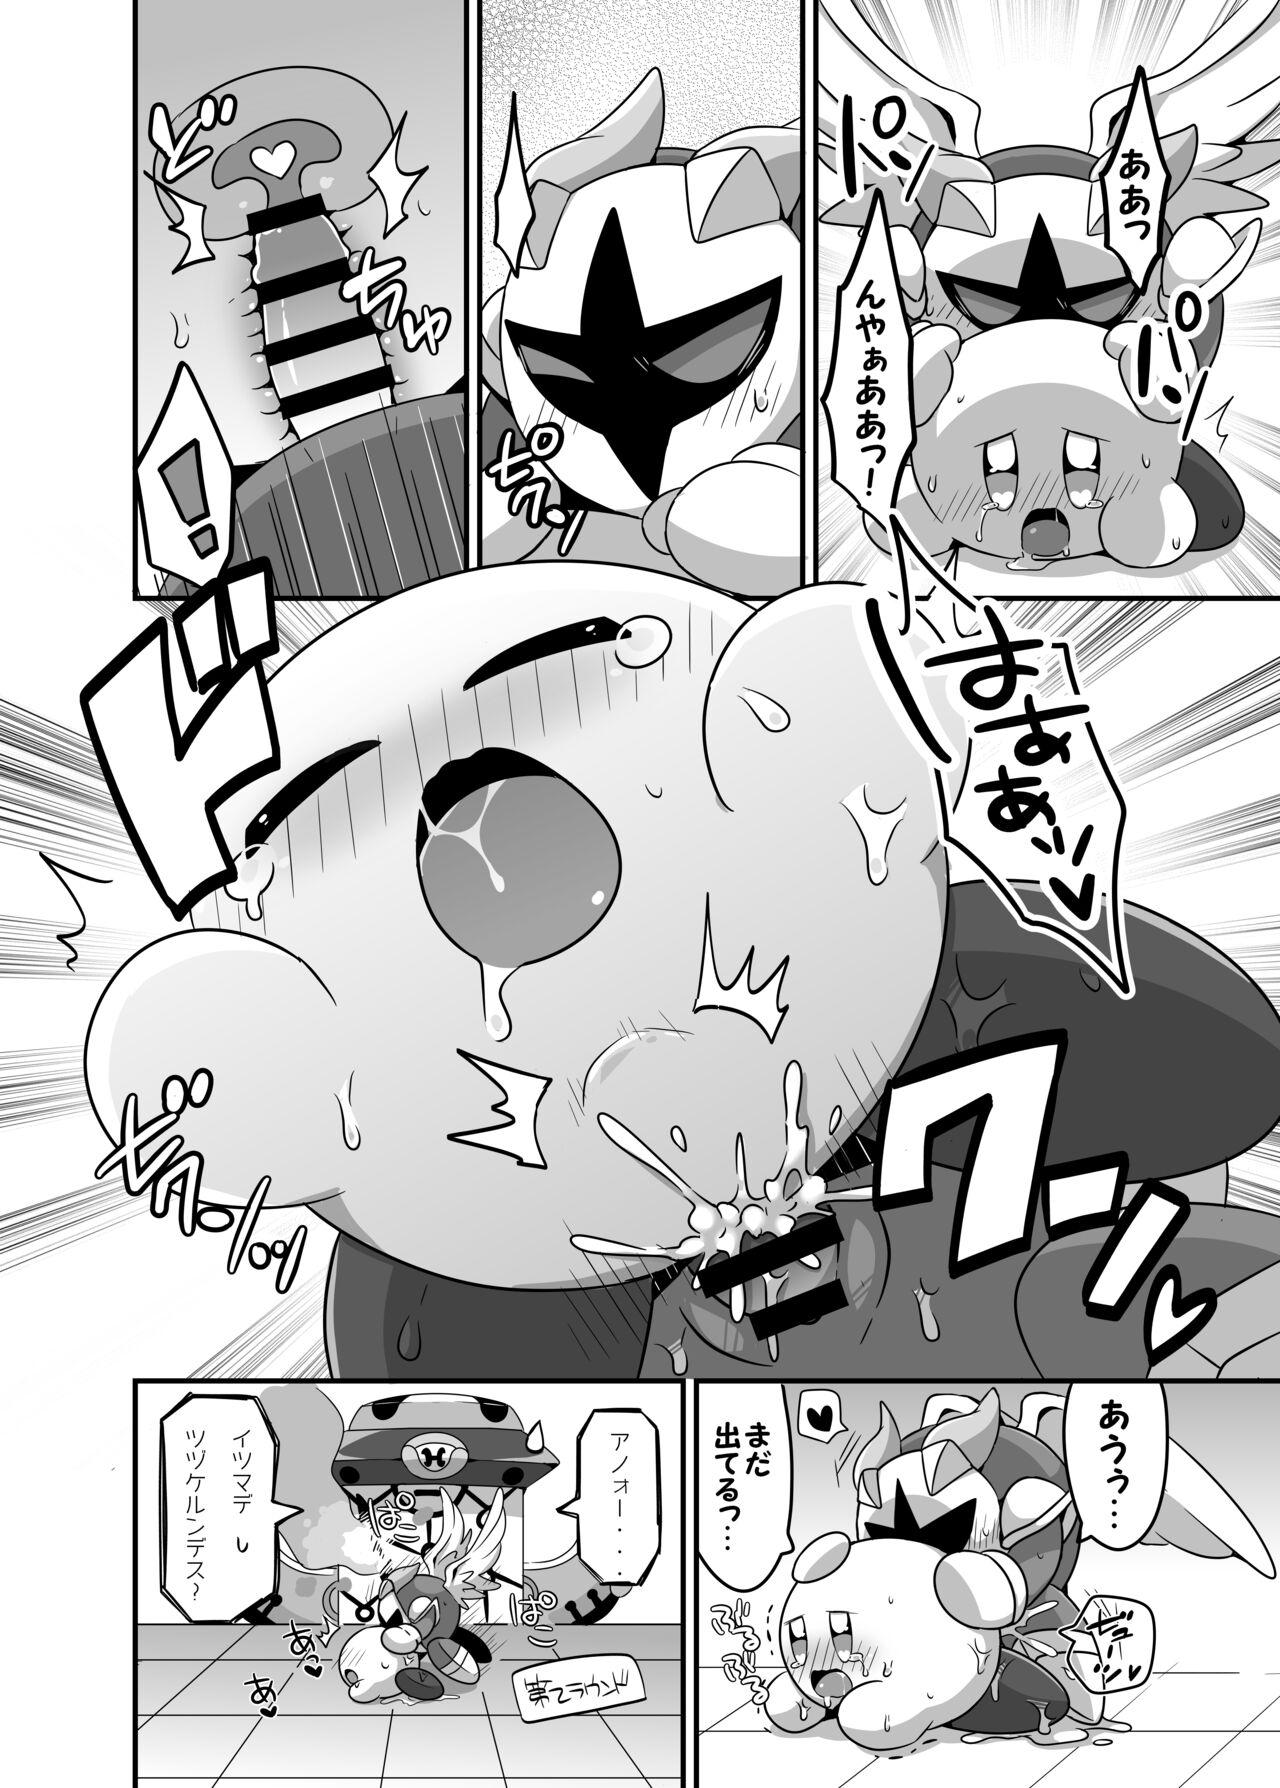 Real Amature Porn I Want to Do XXX Even For Spheres! - Kirby Riding Cock - Page 6